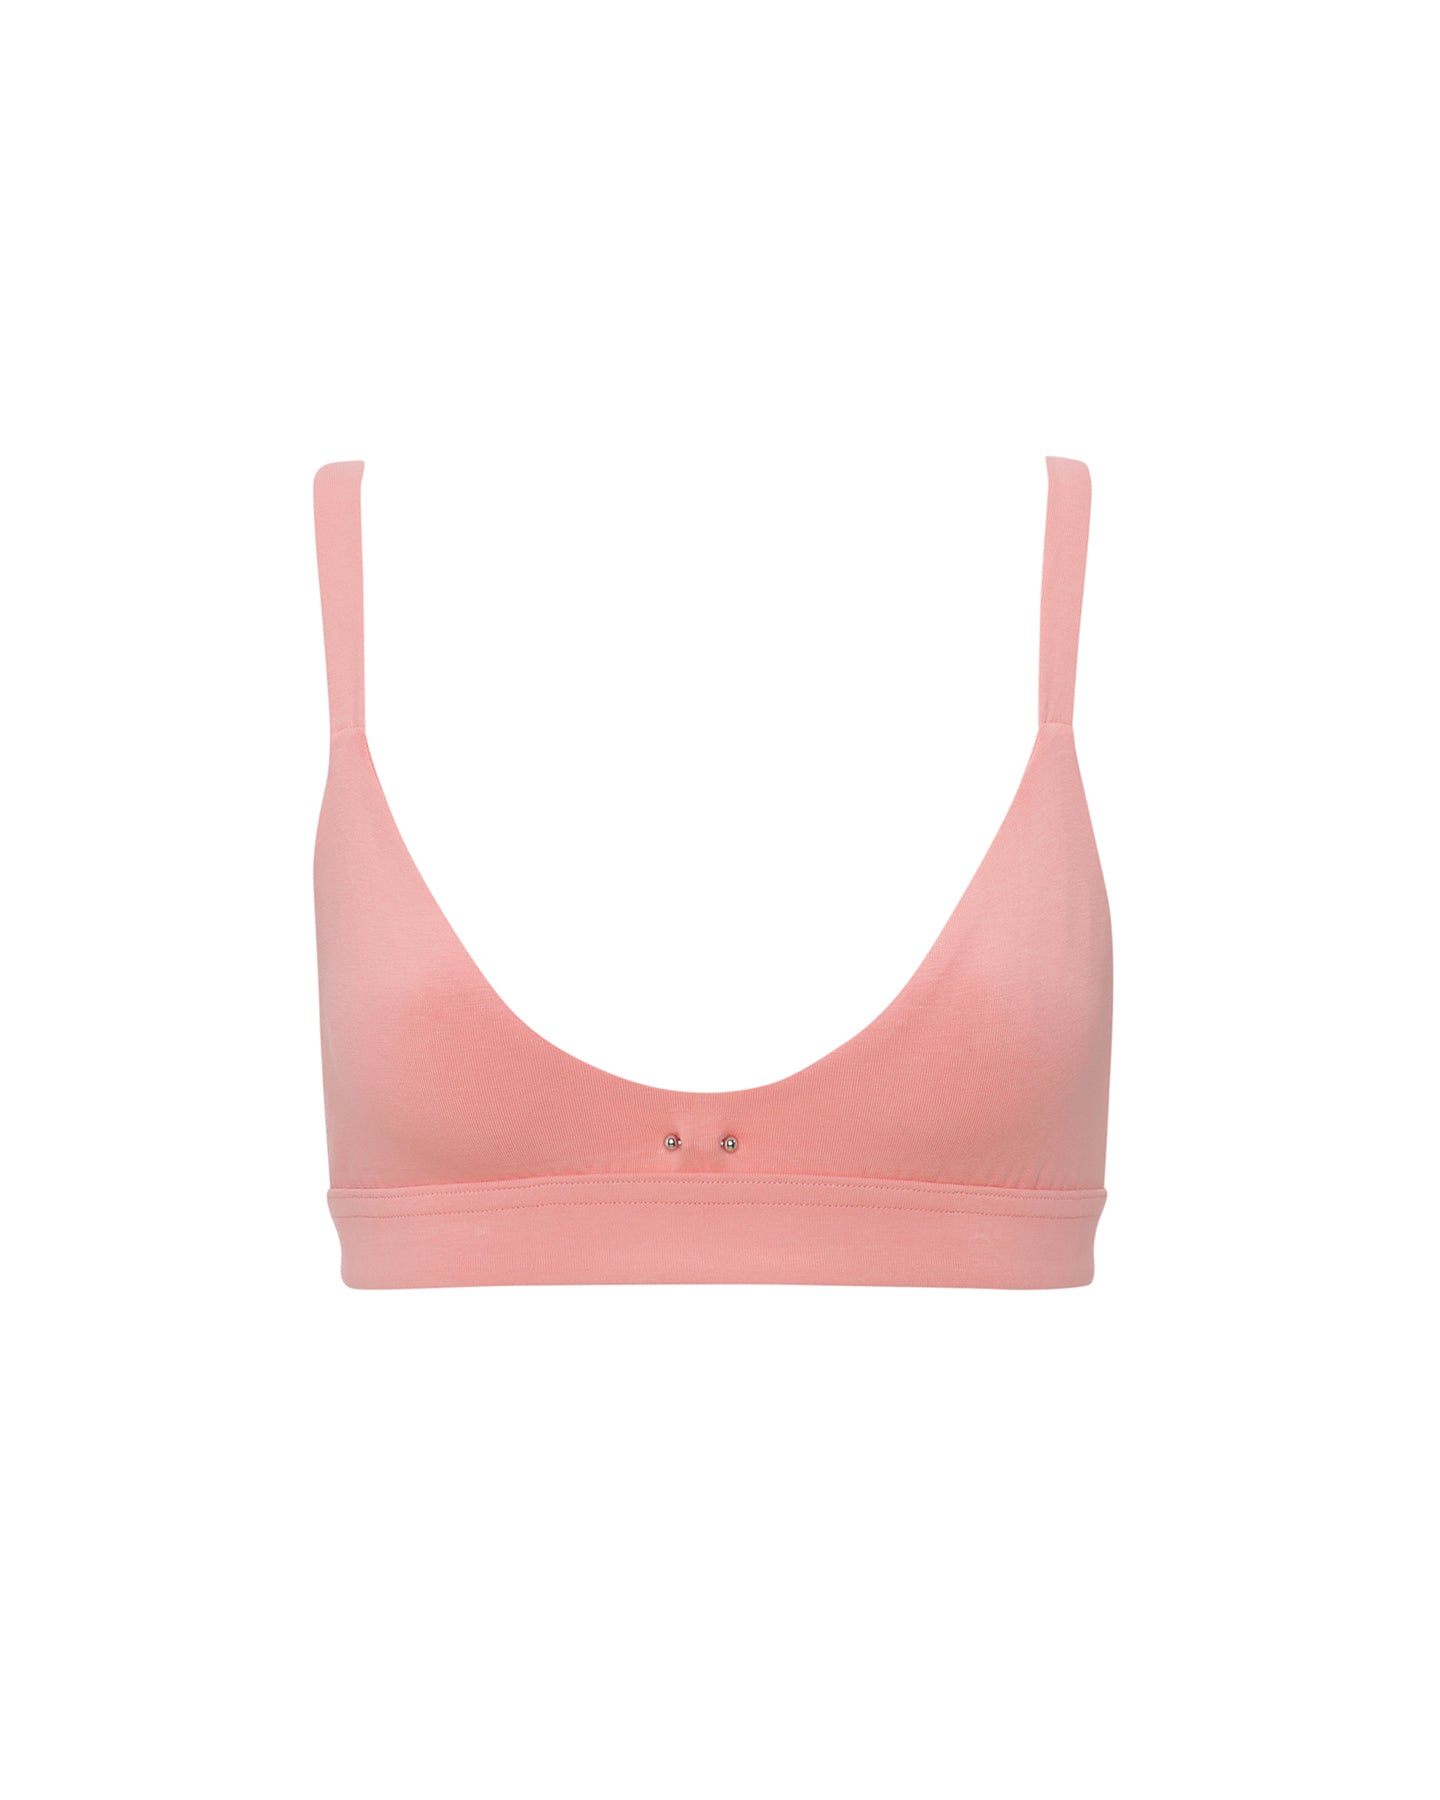 PINK Push Up Bras for Women